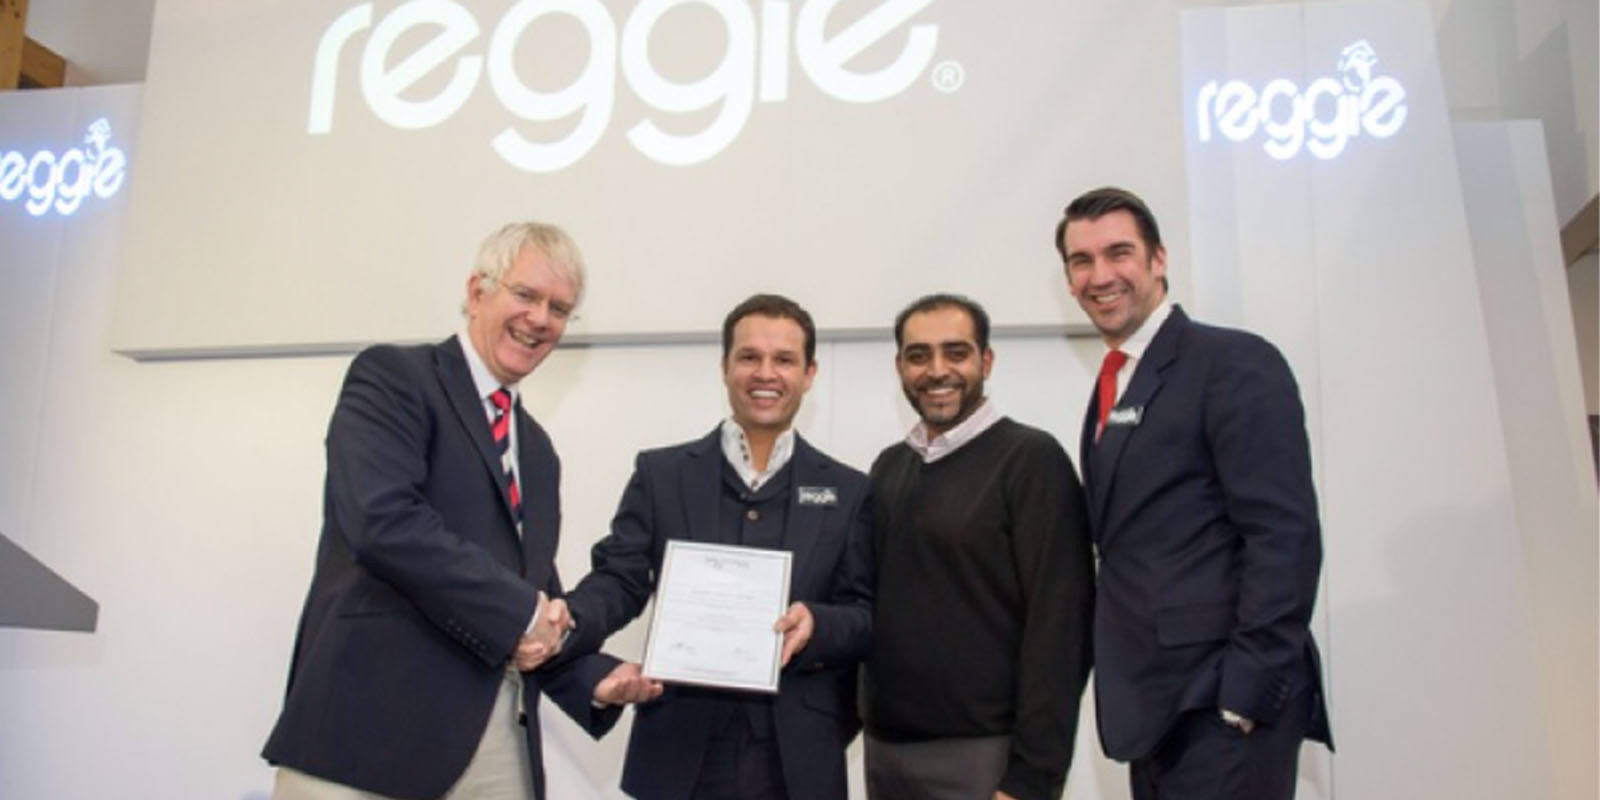 Reggie® Education is accredited by CAPITA SIMs